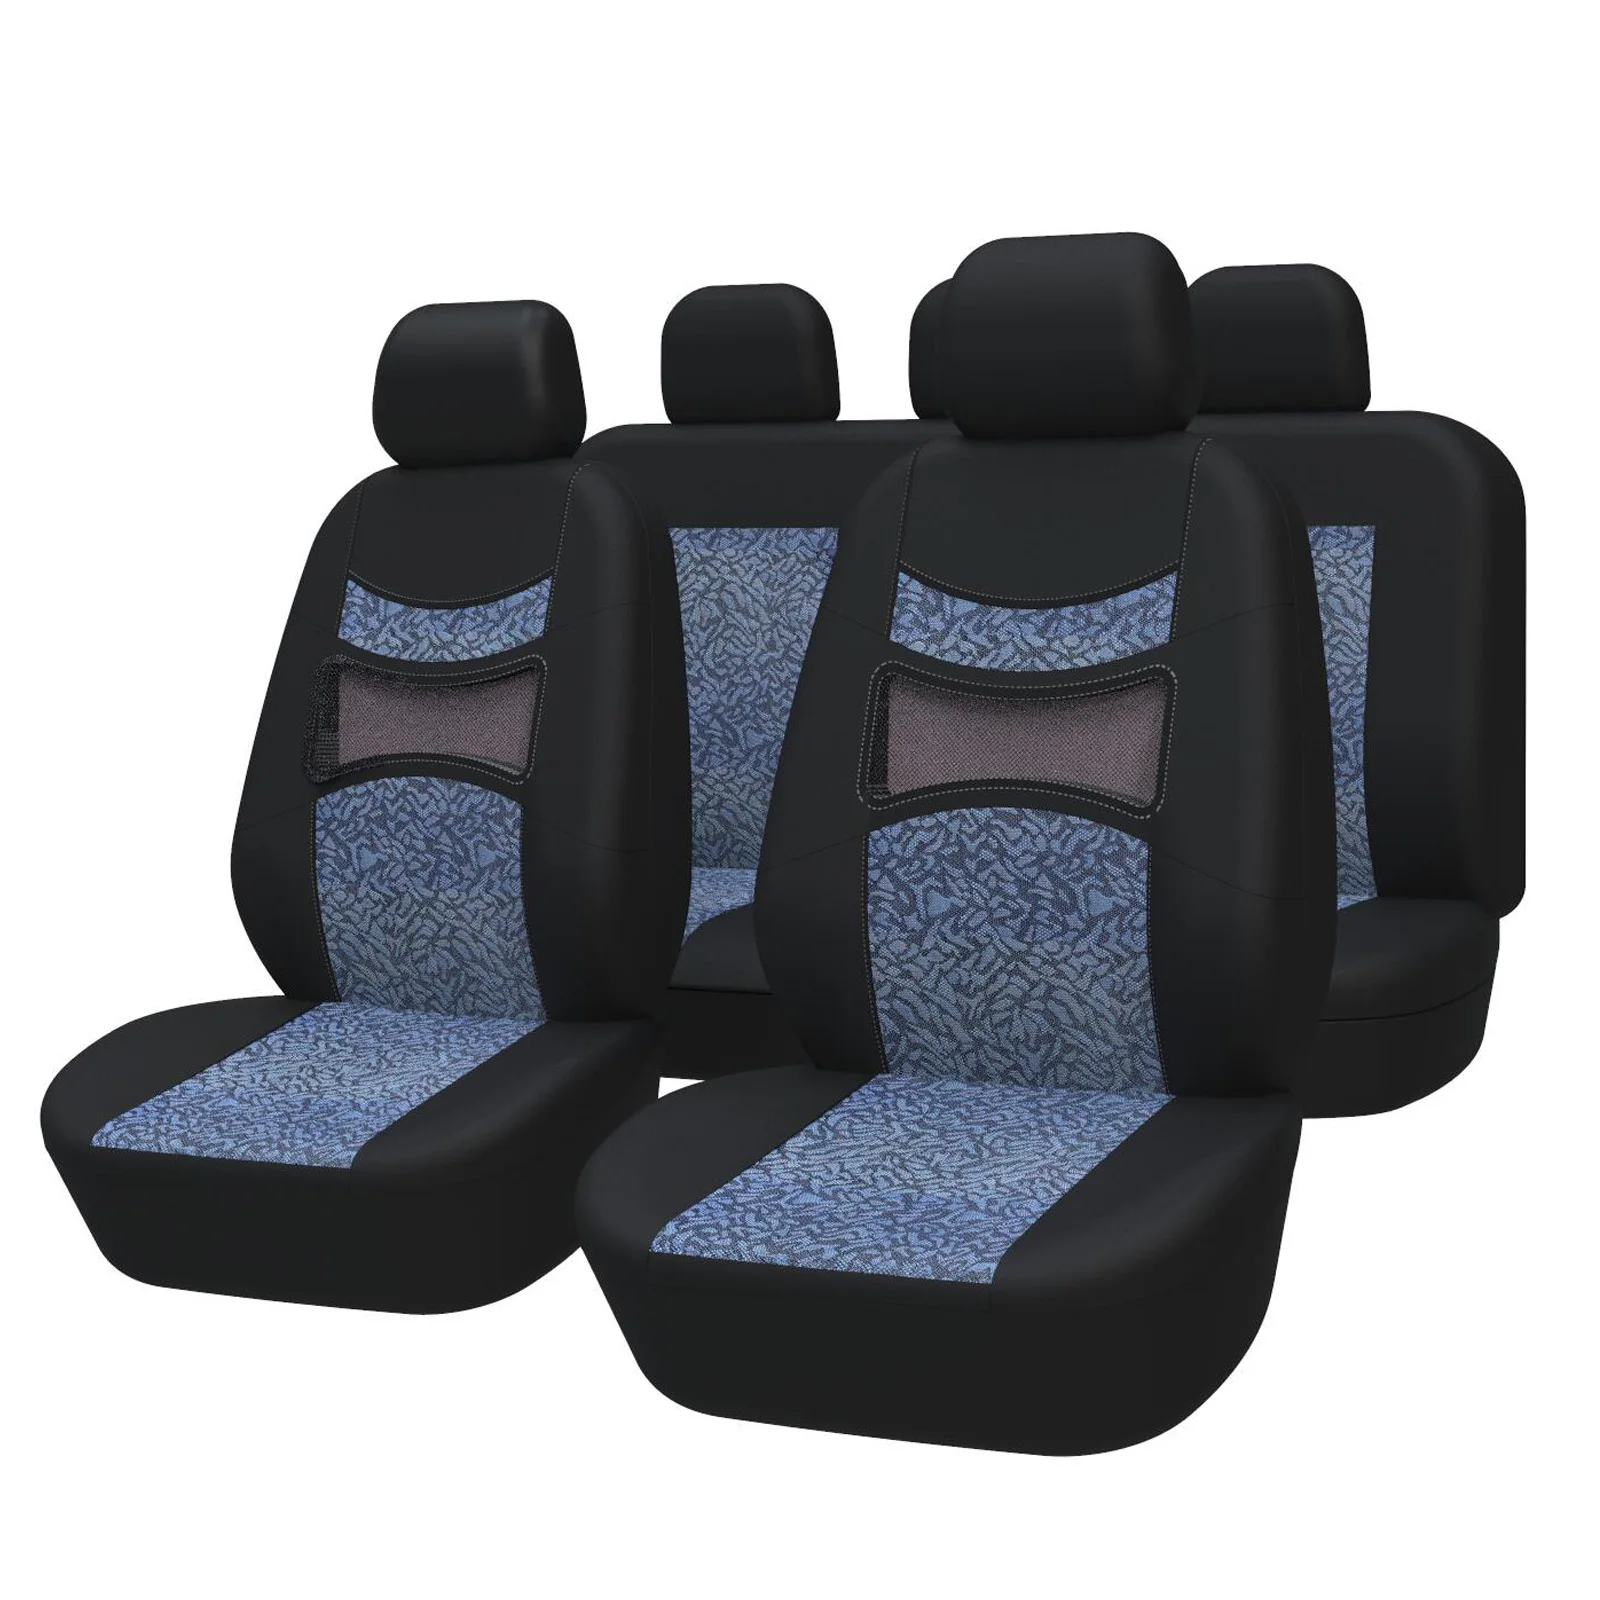 AUTOYOUTH Car Seat Cover Full Set Universal Seat Covers Car Seat Protect... - $46.59